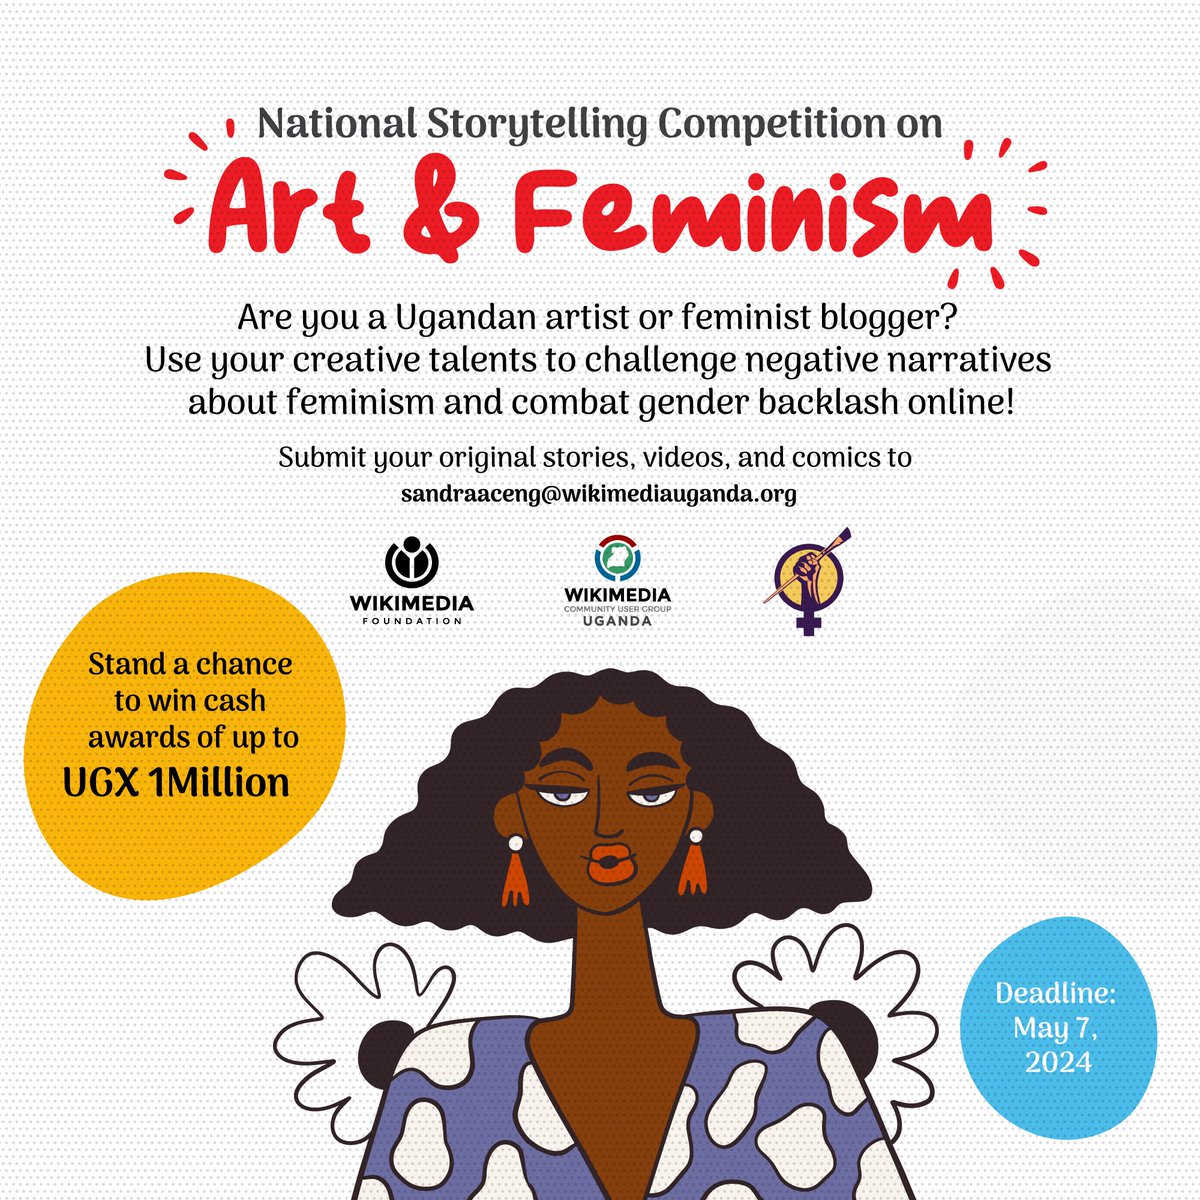 🎨✊ Calling all Ugandan artists & feminist bloggers! Tackle stereotypes & combat gender backlash with your art. Submit stories, videos, & comics by May 7, 2024. Win up to UGX 1,000,000 in prizes! Let's change the narrative through art. #ArtAndFeminism #Uganda #GenderEquality